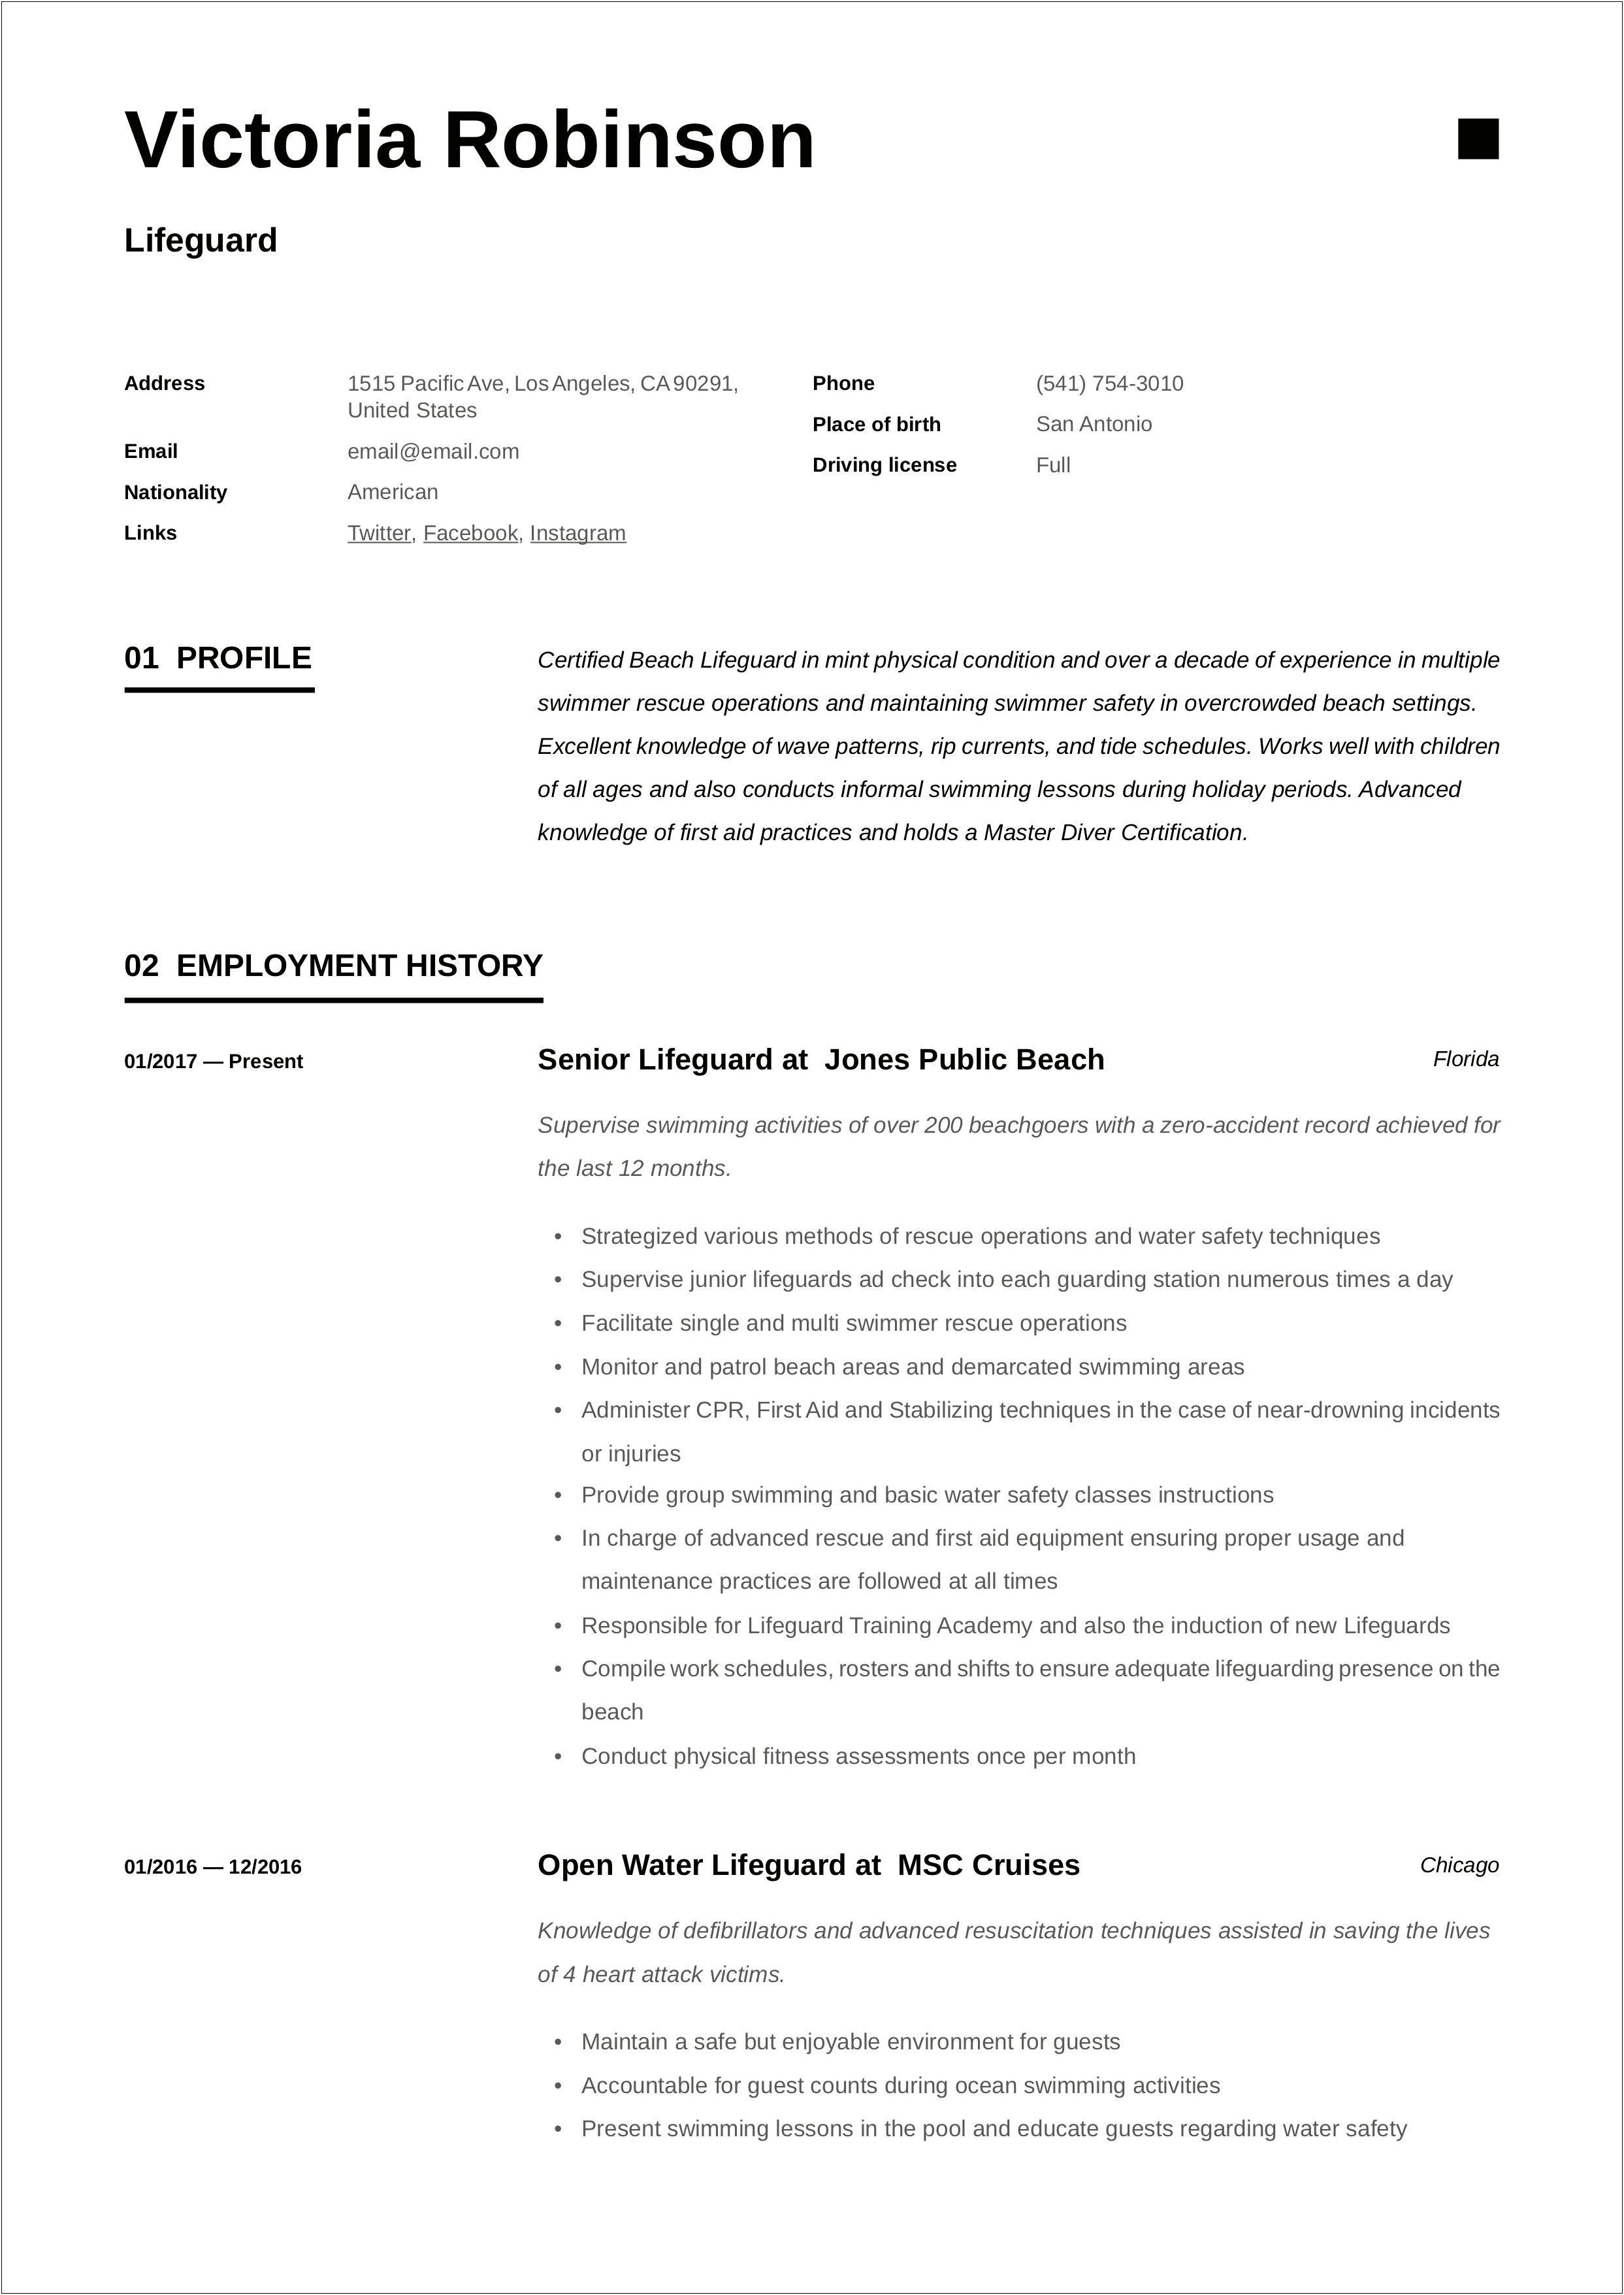 Resume Objective For Lifeguard Position